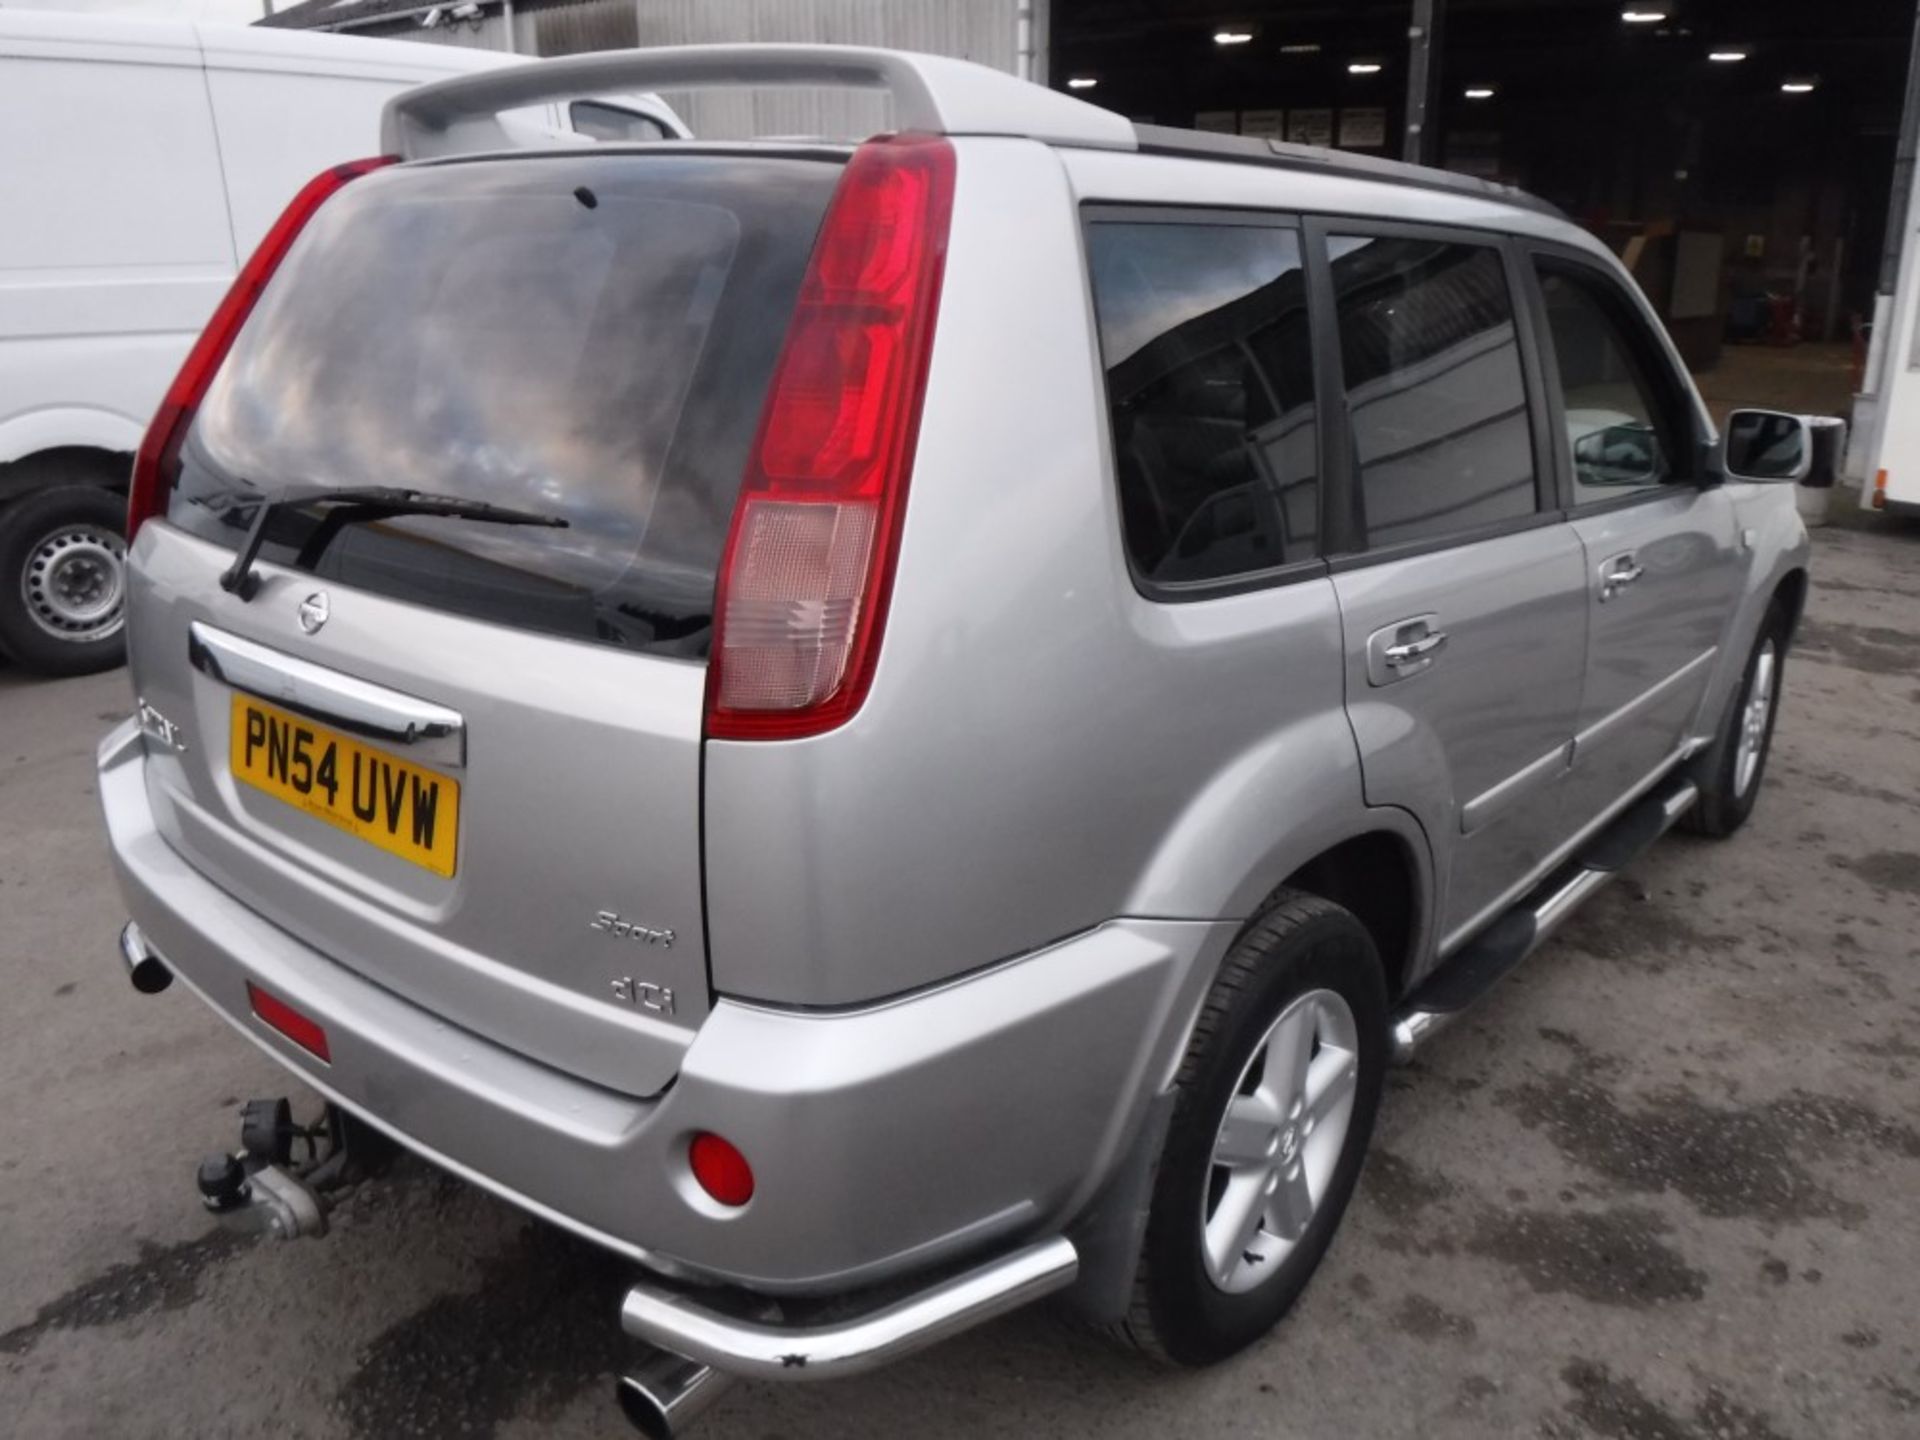 54 reg NISSAN X-TRAIL SPORT DCI, 1ST REG 09/04, TEST 03/18, 115569M, V5 HERE, 3 FORMER KEEPERS [NO - Image 4 of 5